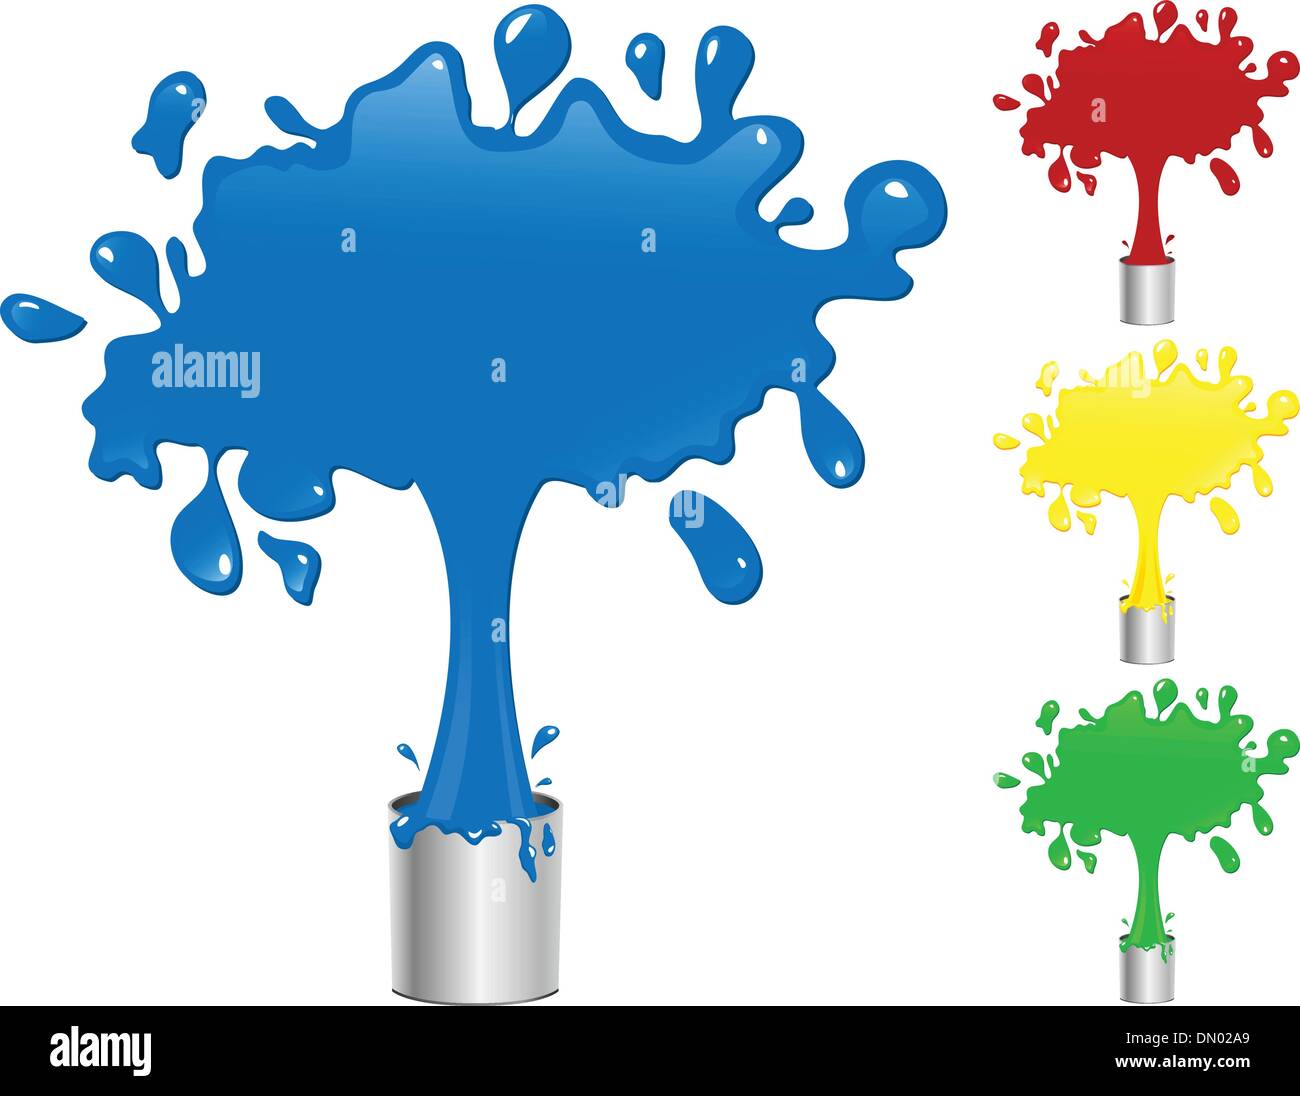 Blue, Red, Yellow and Green Paint Splash Buckets. Stock Vector